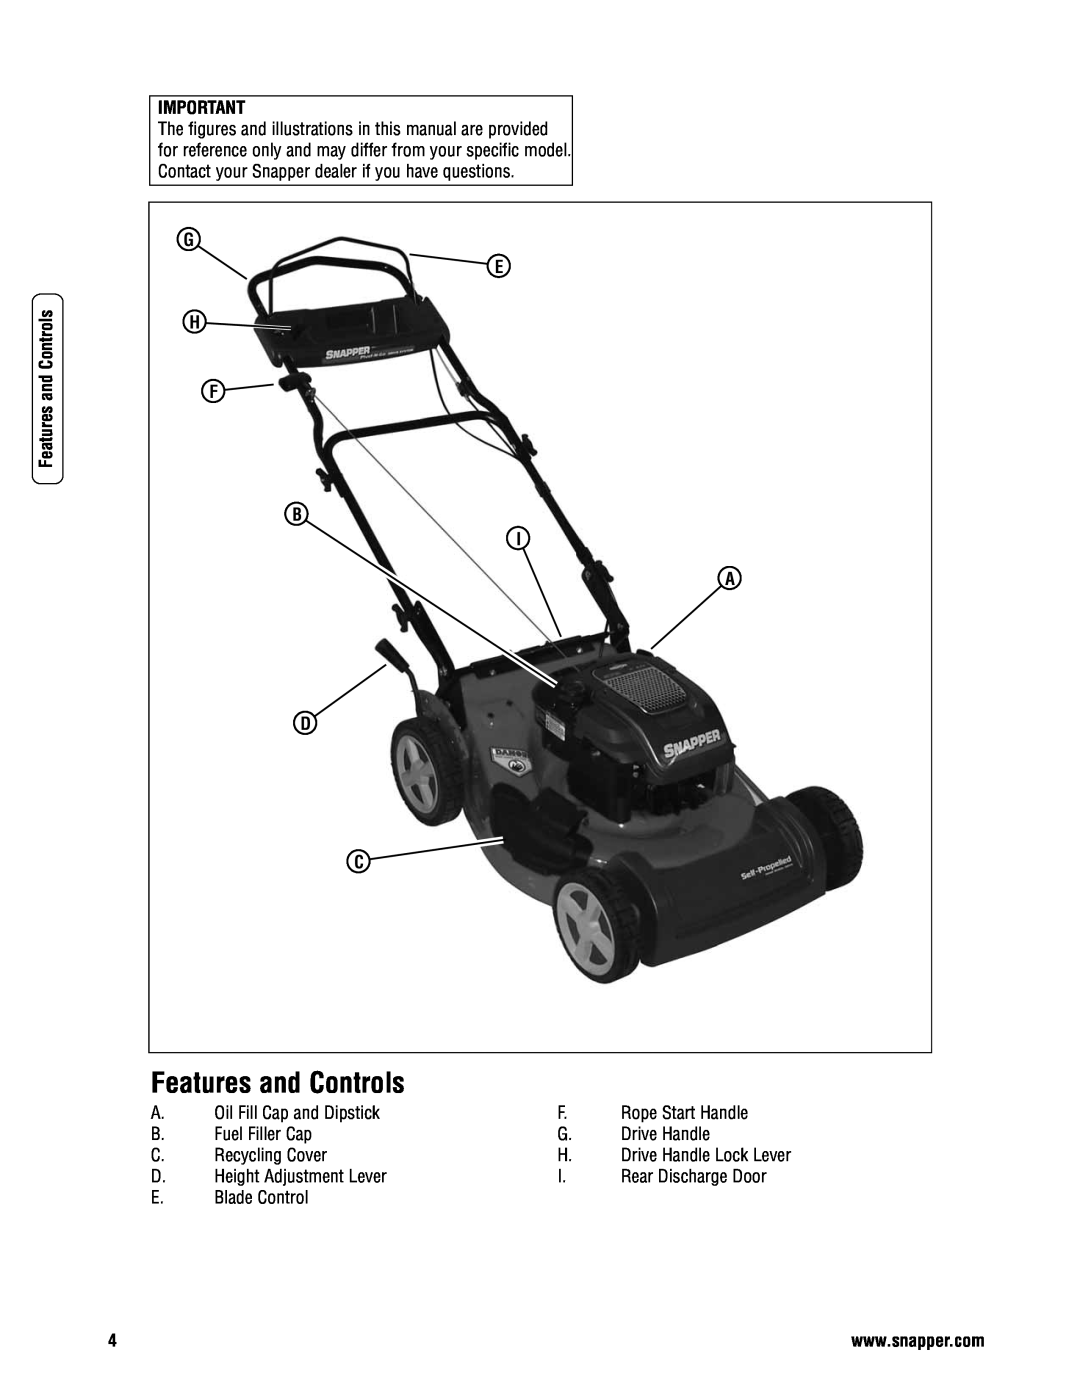 Briggs & Stratton NSPVH21675 specifications Features and Controls 